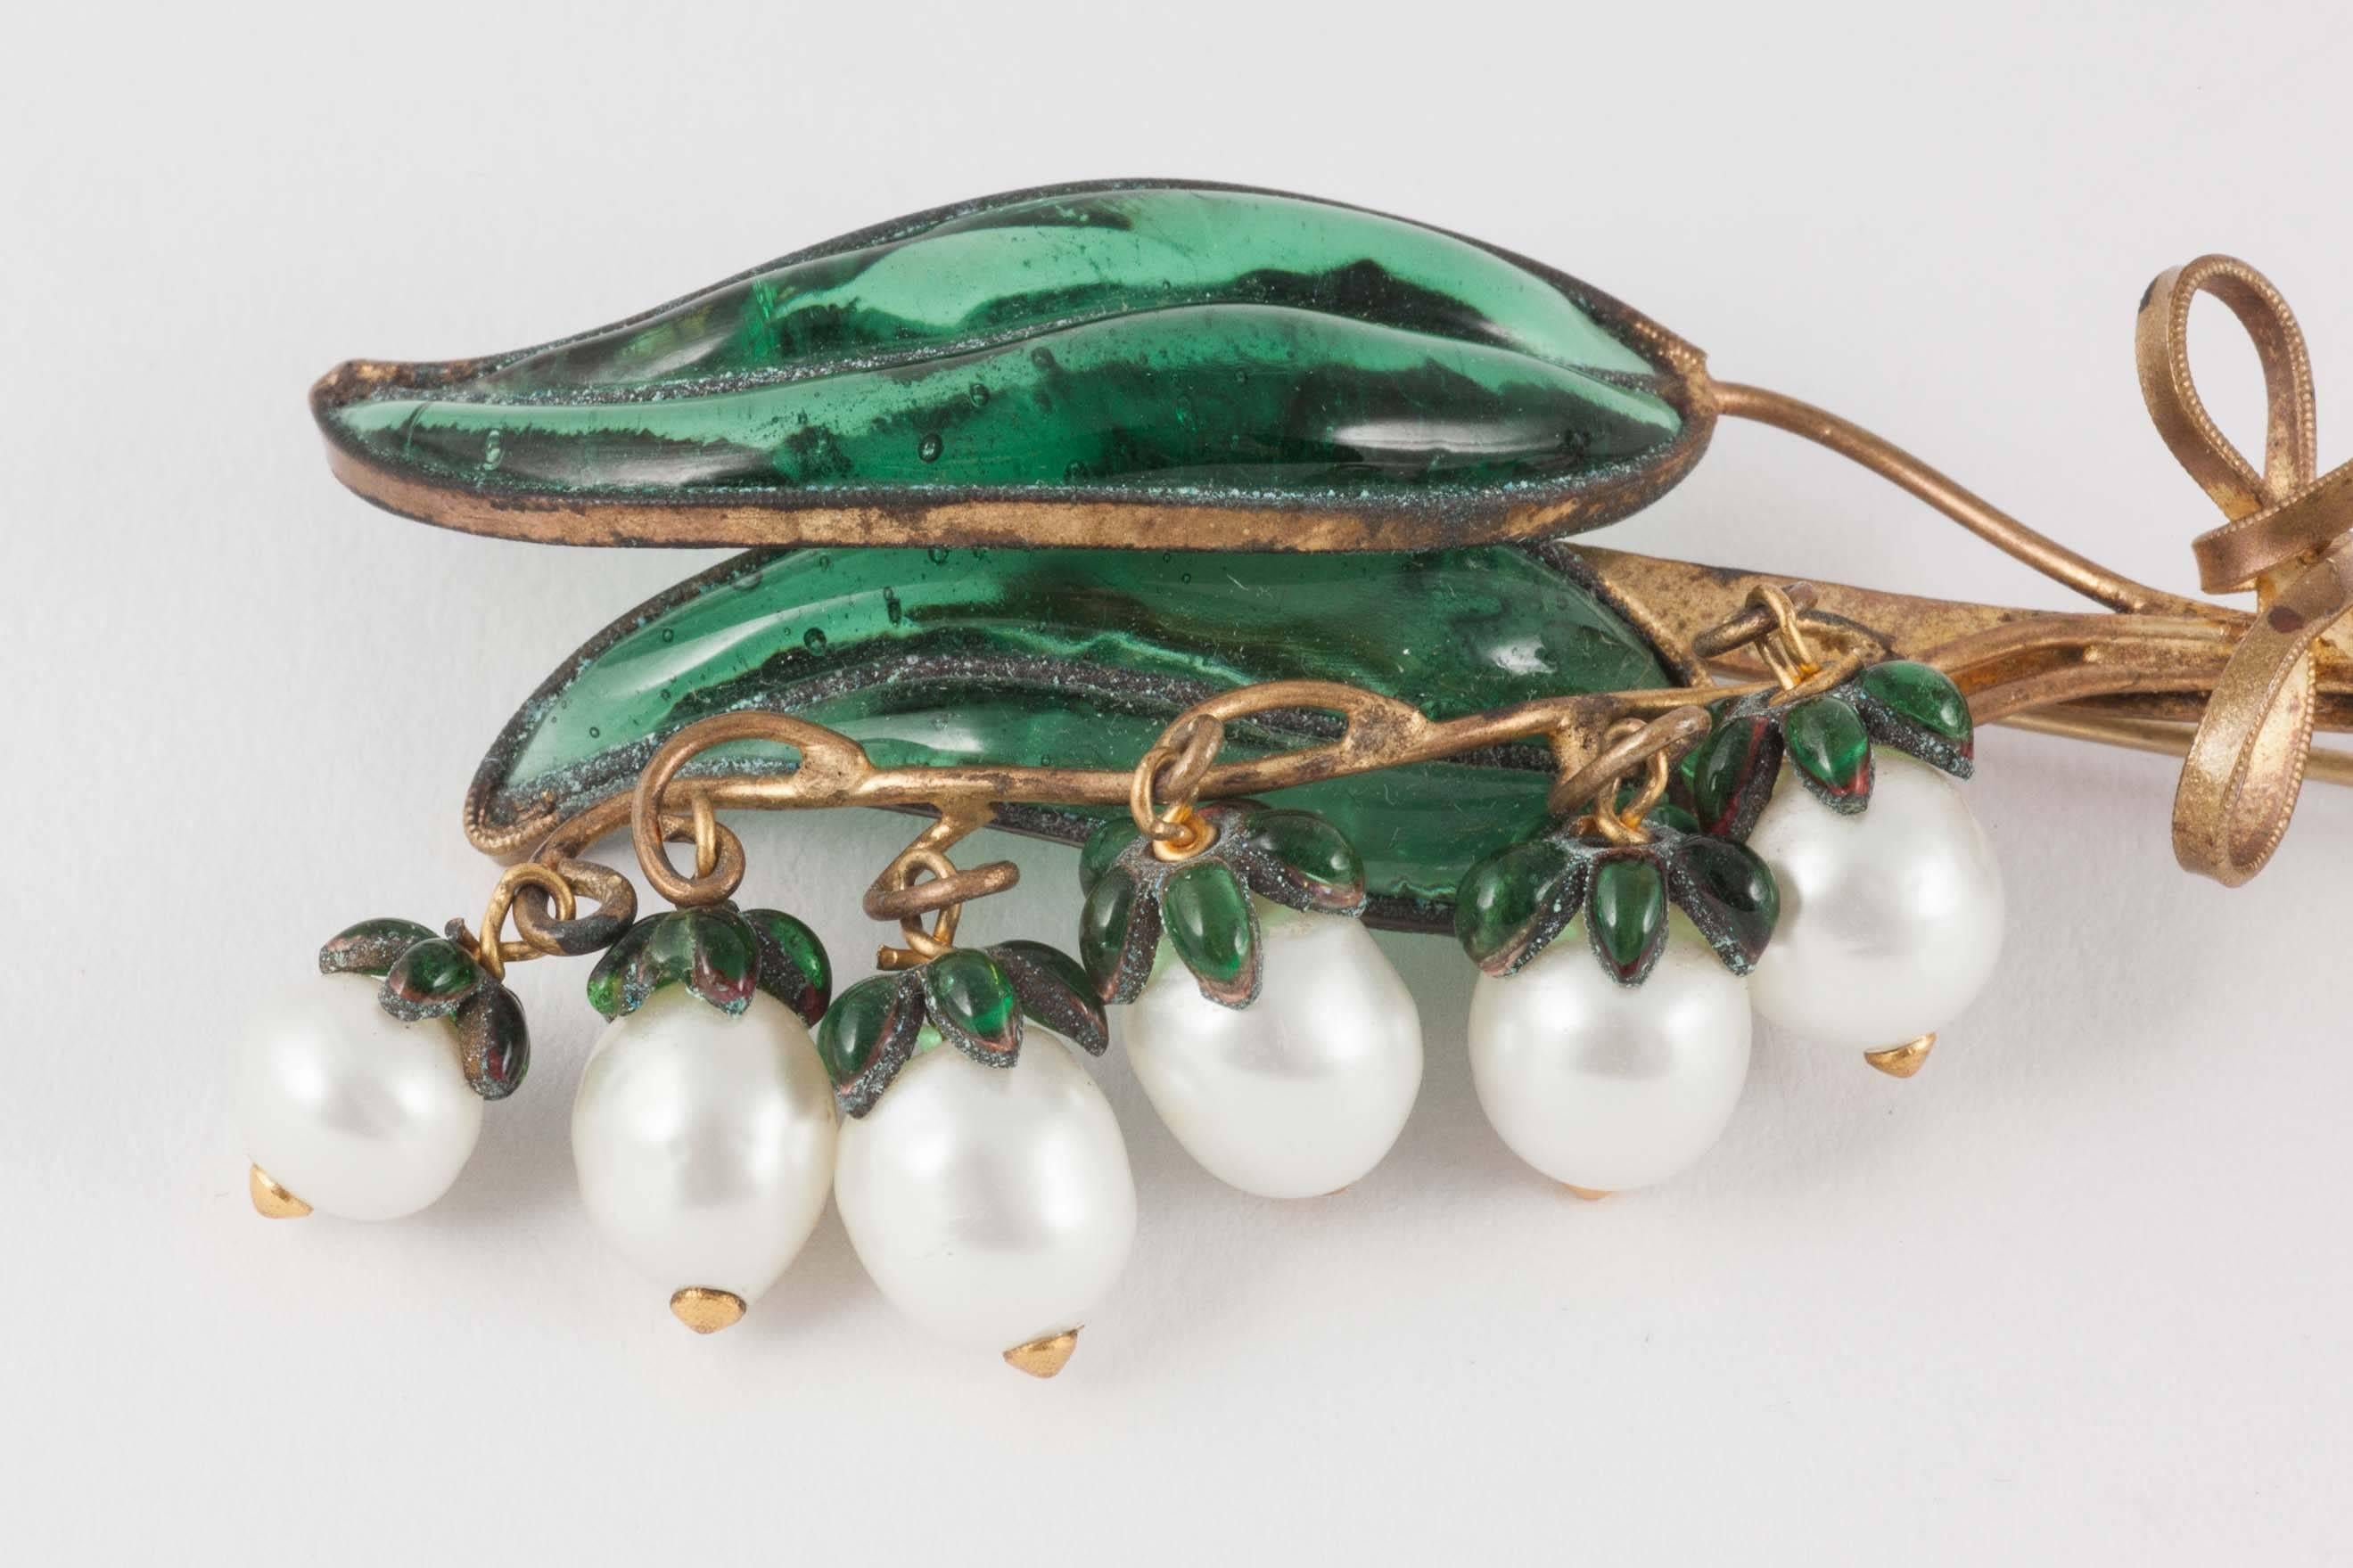 One of the most iconic images of the House of Dior, this delicate and highly feminine 'Lily of the Valley' or 'Muguet' brooch is the work of the artisan workshop Maison Gripoix, made of poured glass, nacred pearls and gilt metal. 'Lily of the